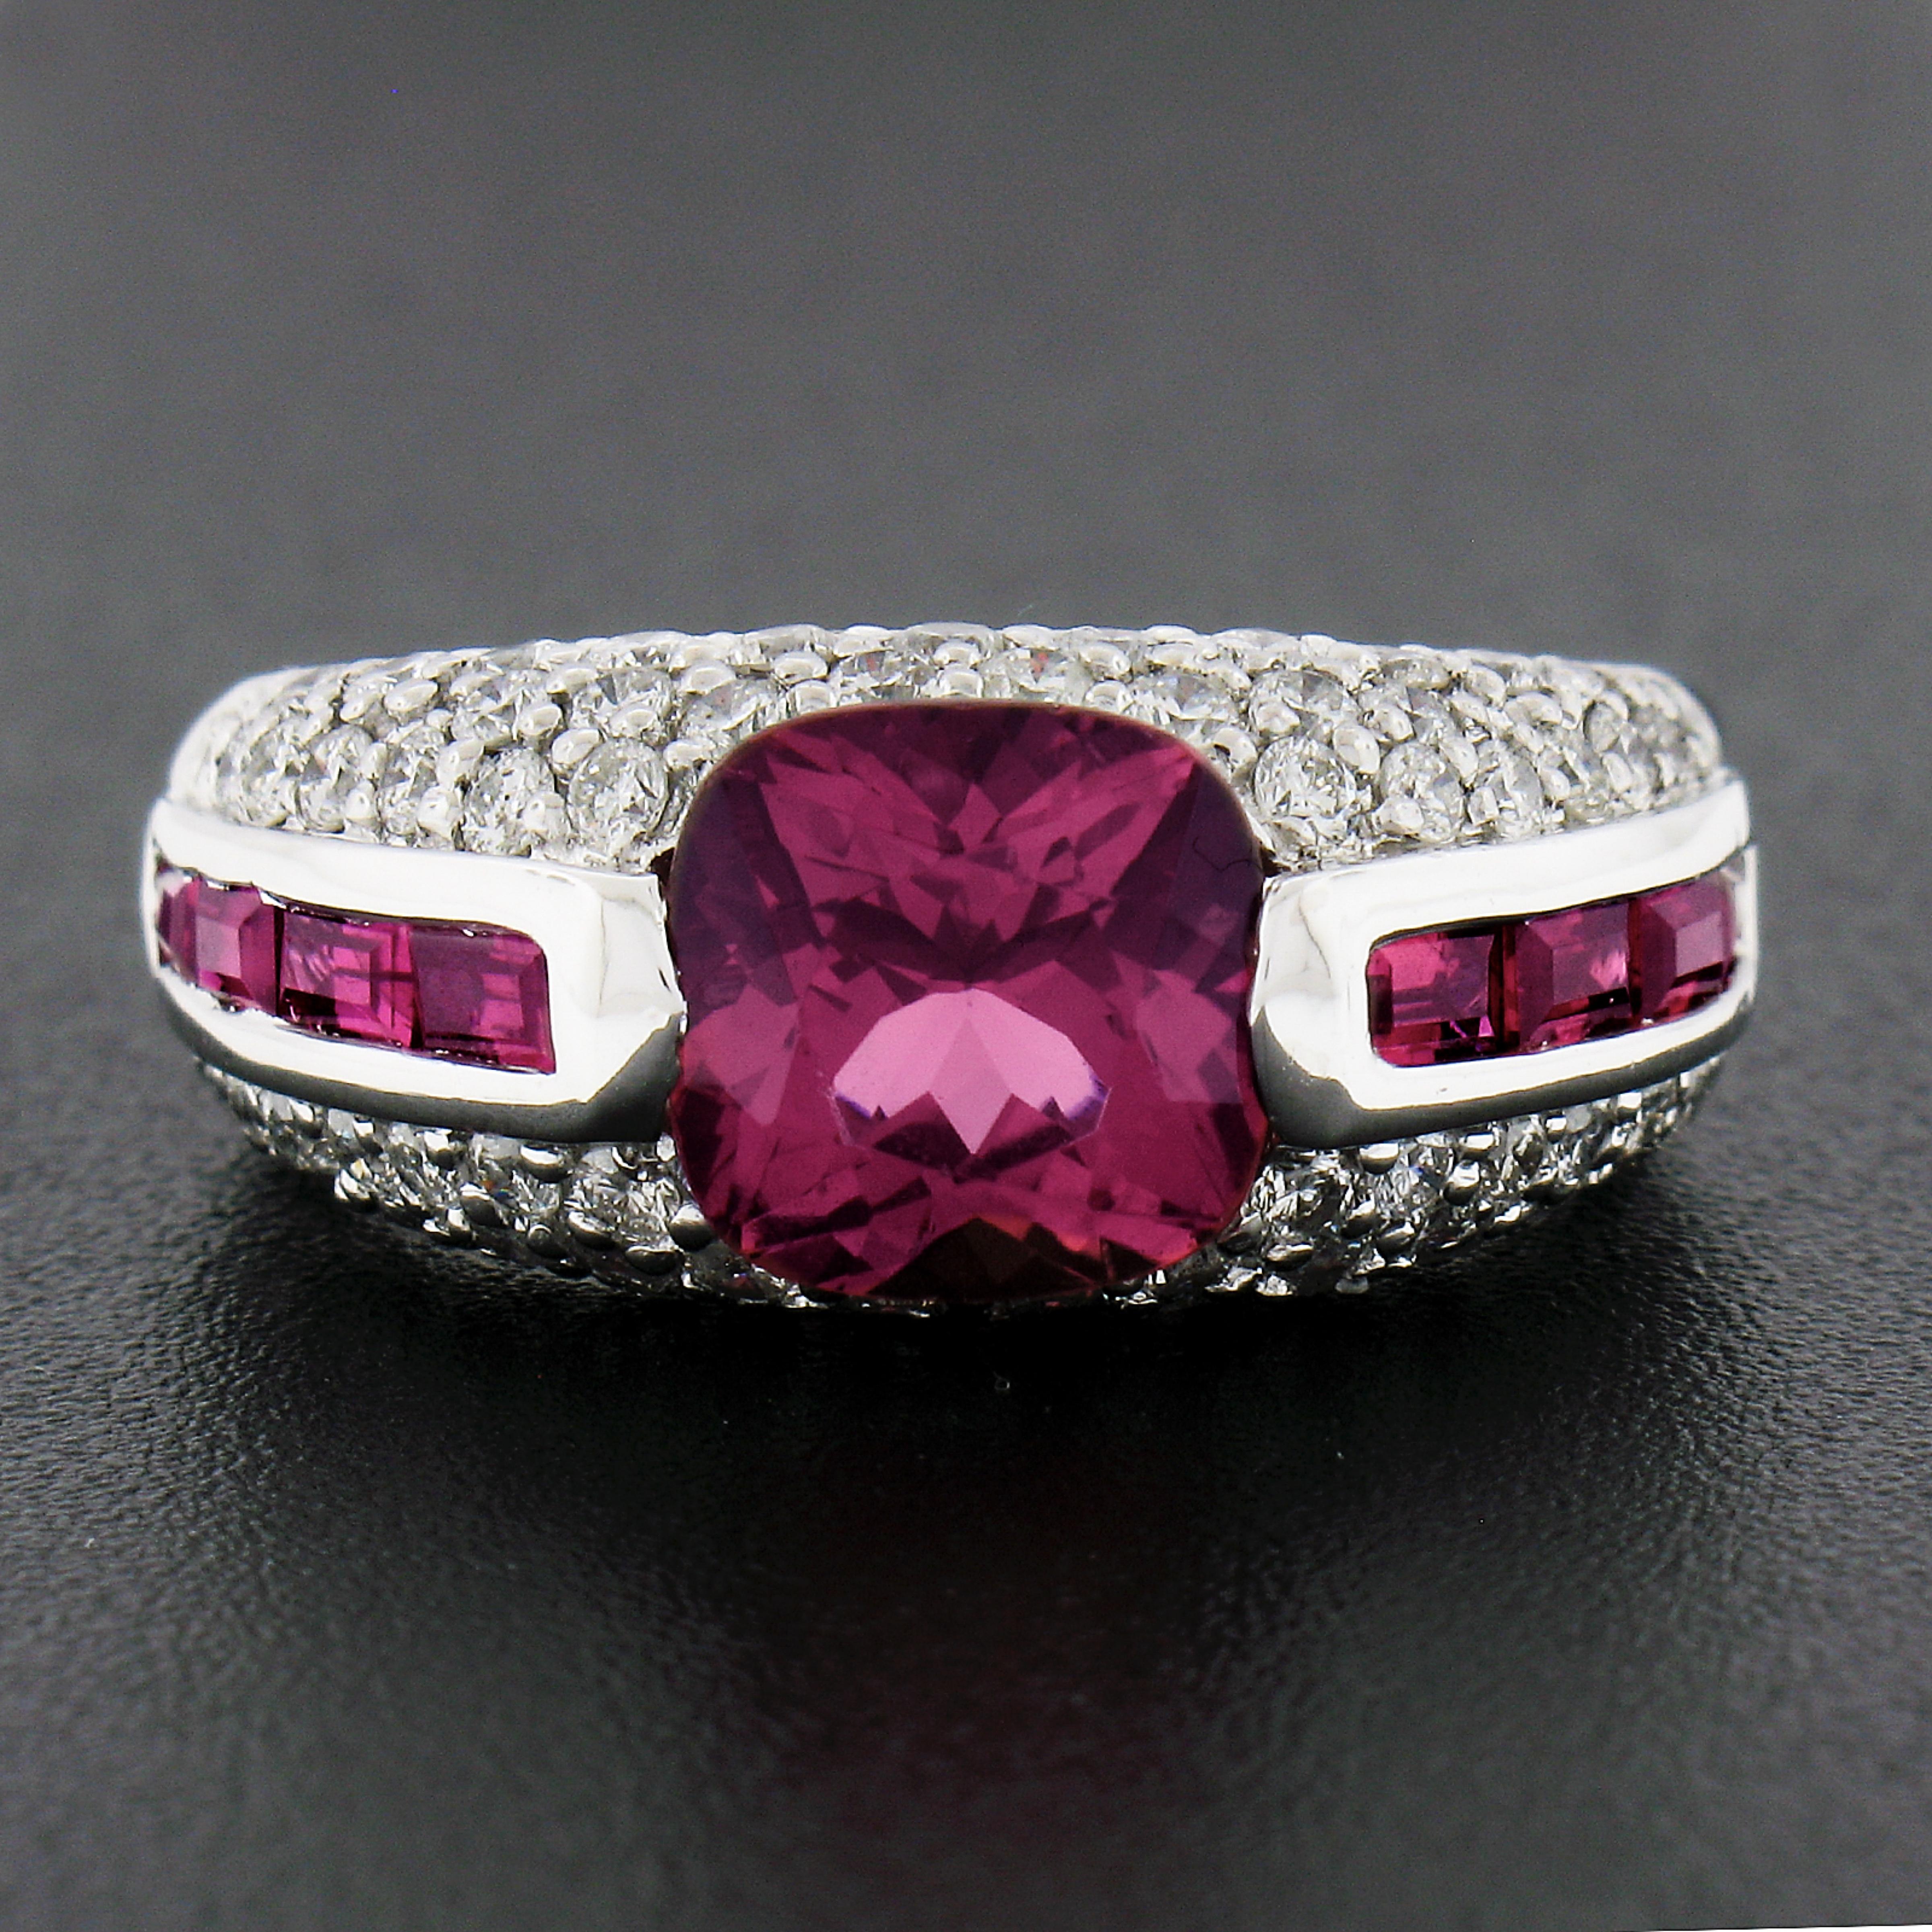 Sonia B. 18k Gold Cushion Pink Tourmaline Solitaire Spinel & Diamond Band Ring In Good Condition For Sale In Montclair, NJ